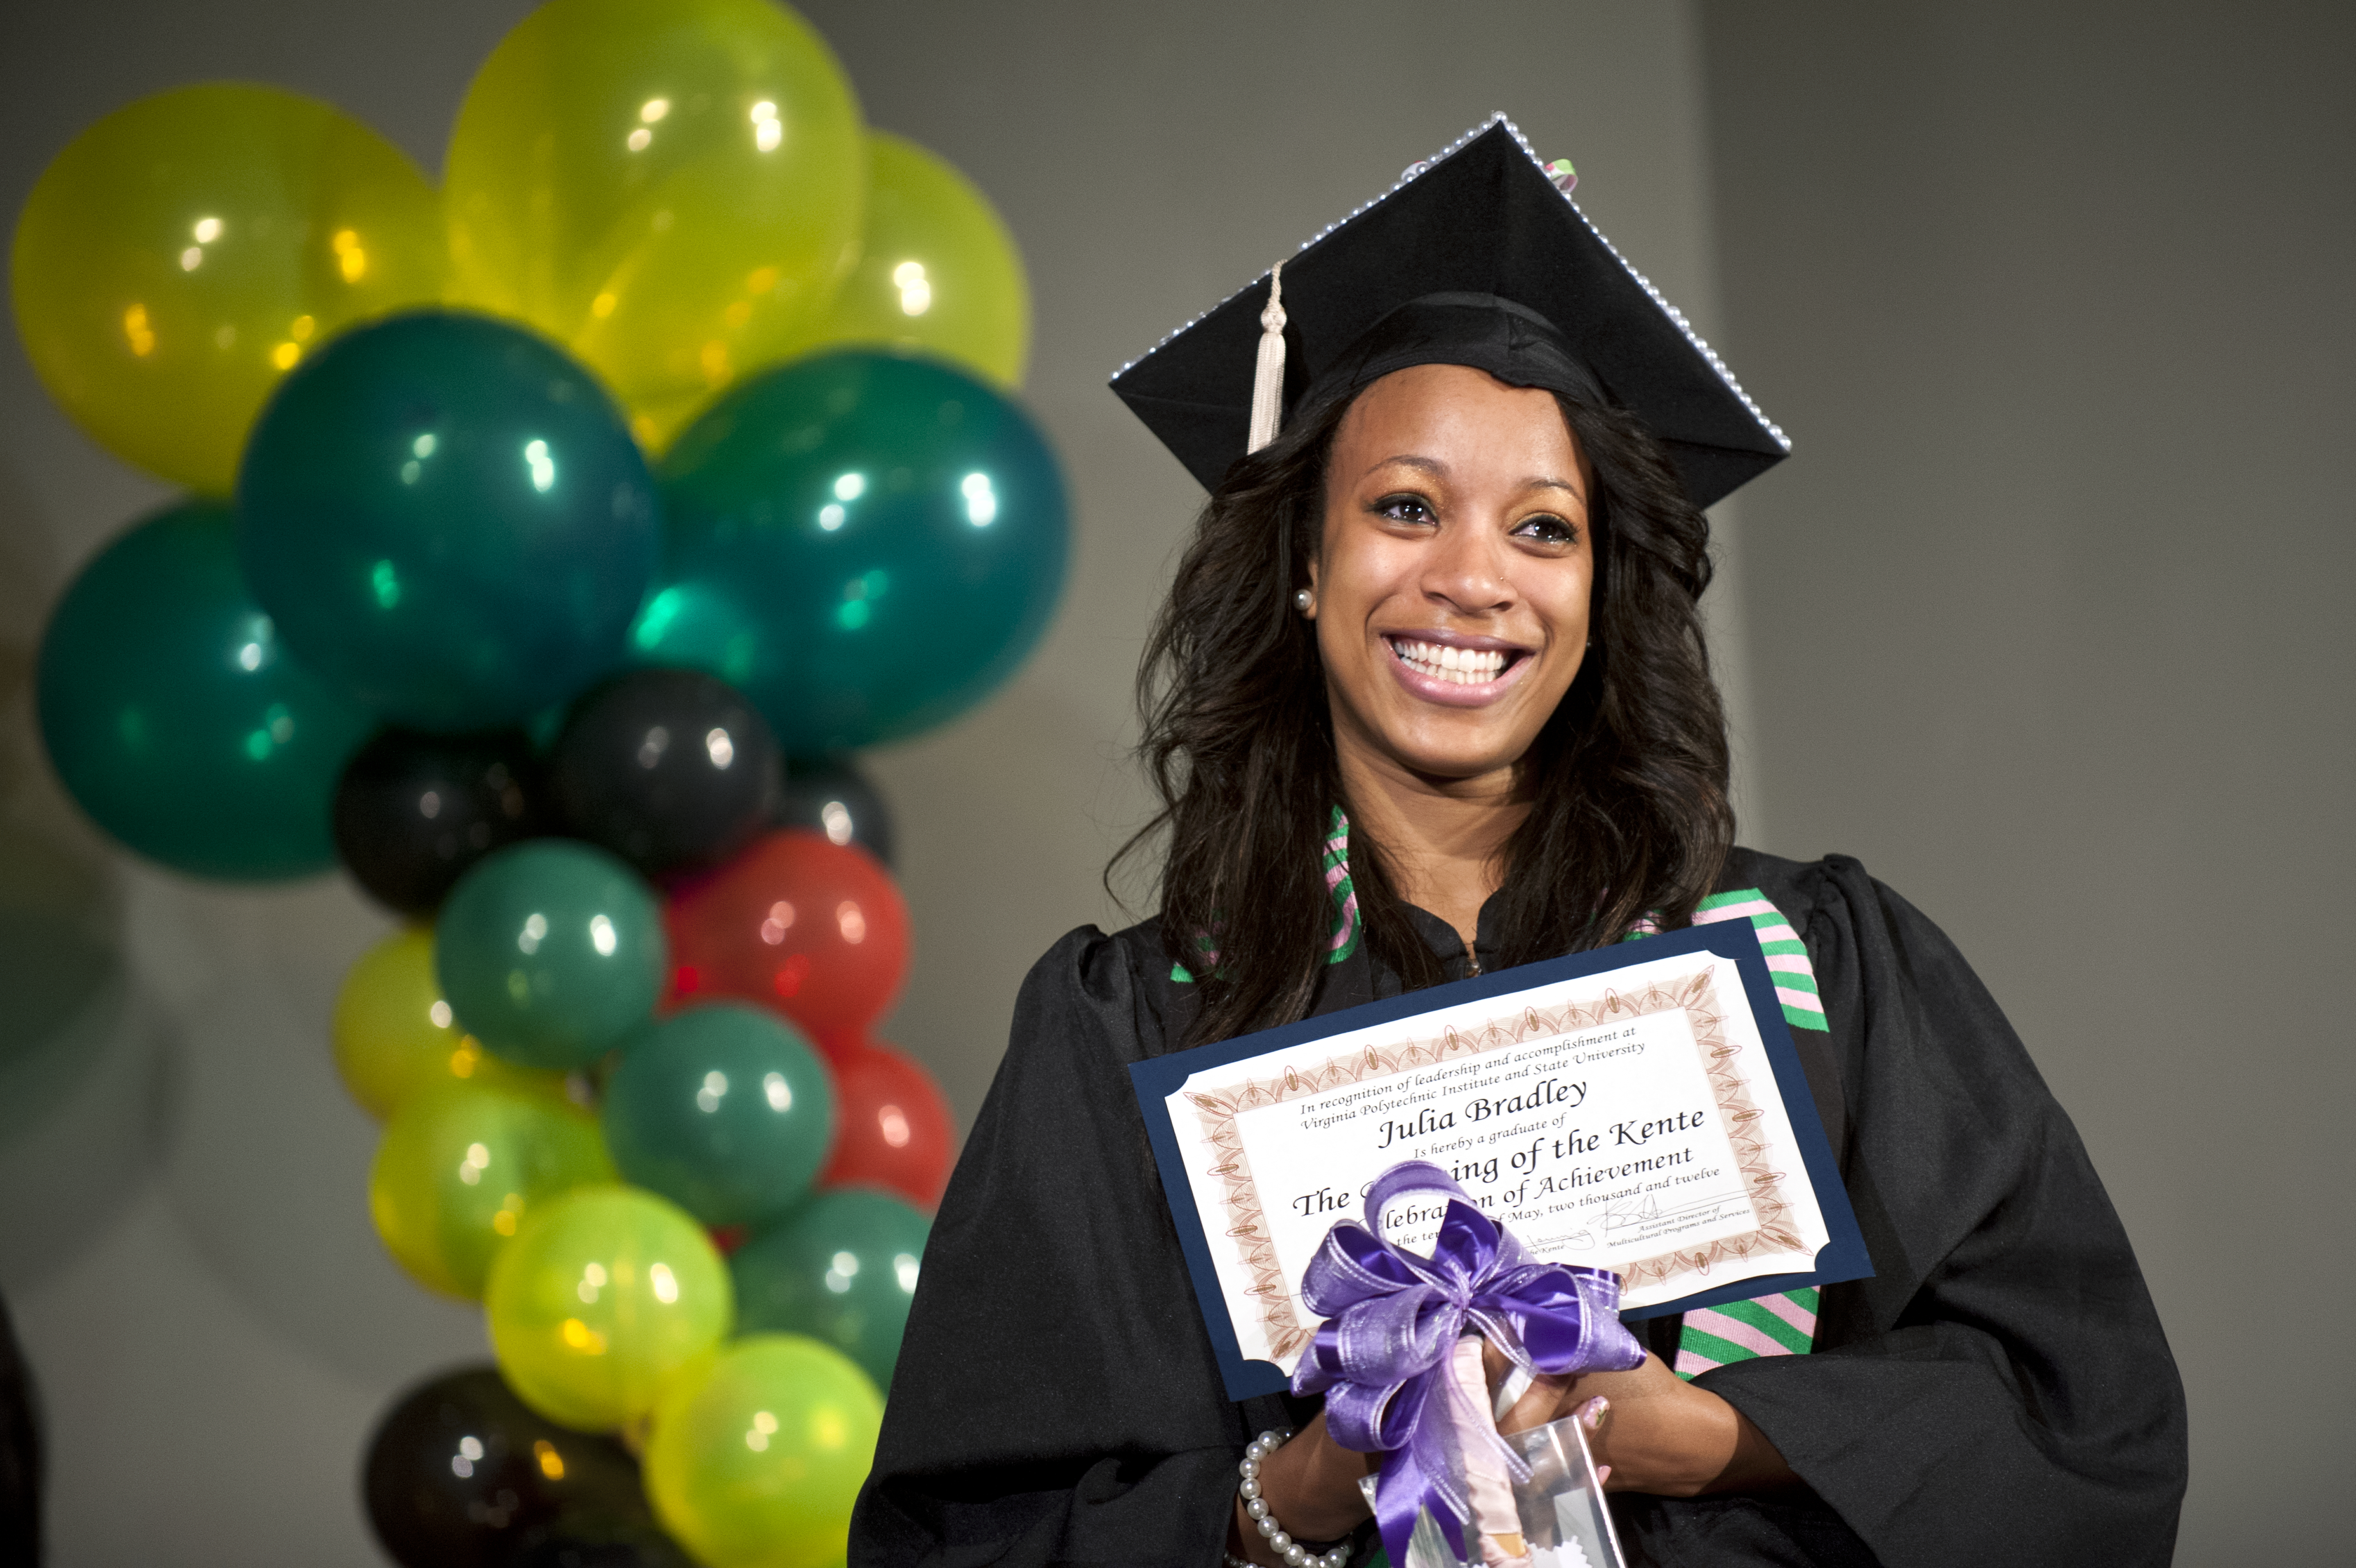 A student dress in commencement regalia smiles with tears in her eyes, as she holds a certificate at the Donning of the Kente ceremony.